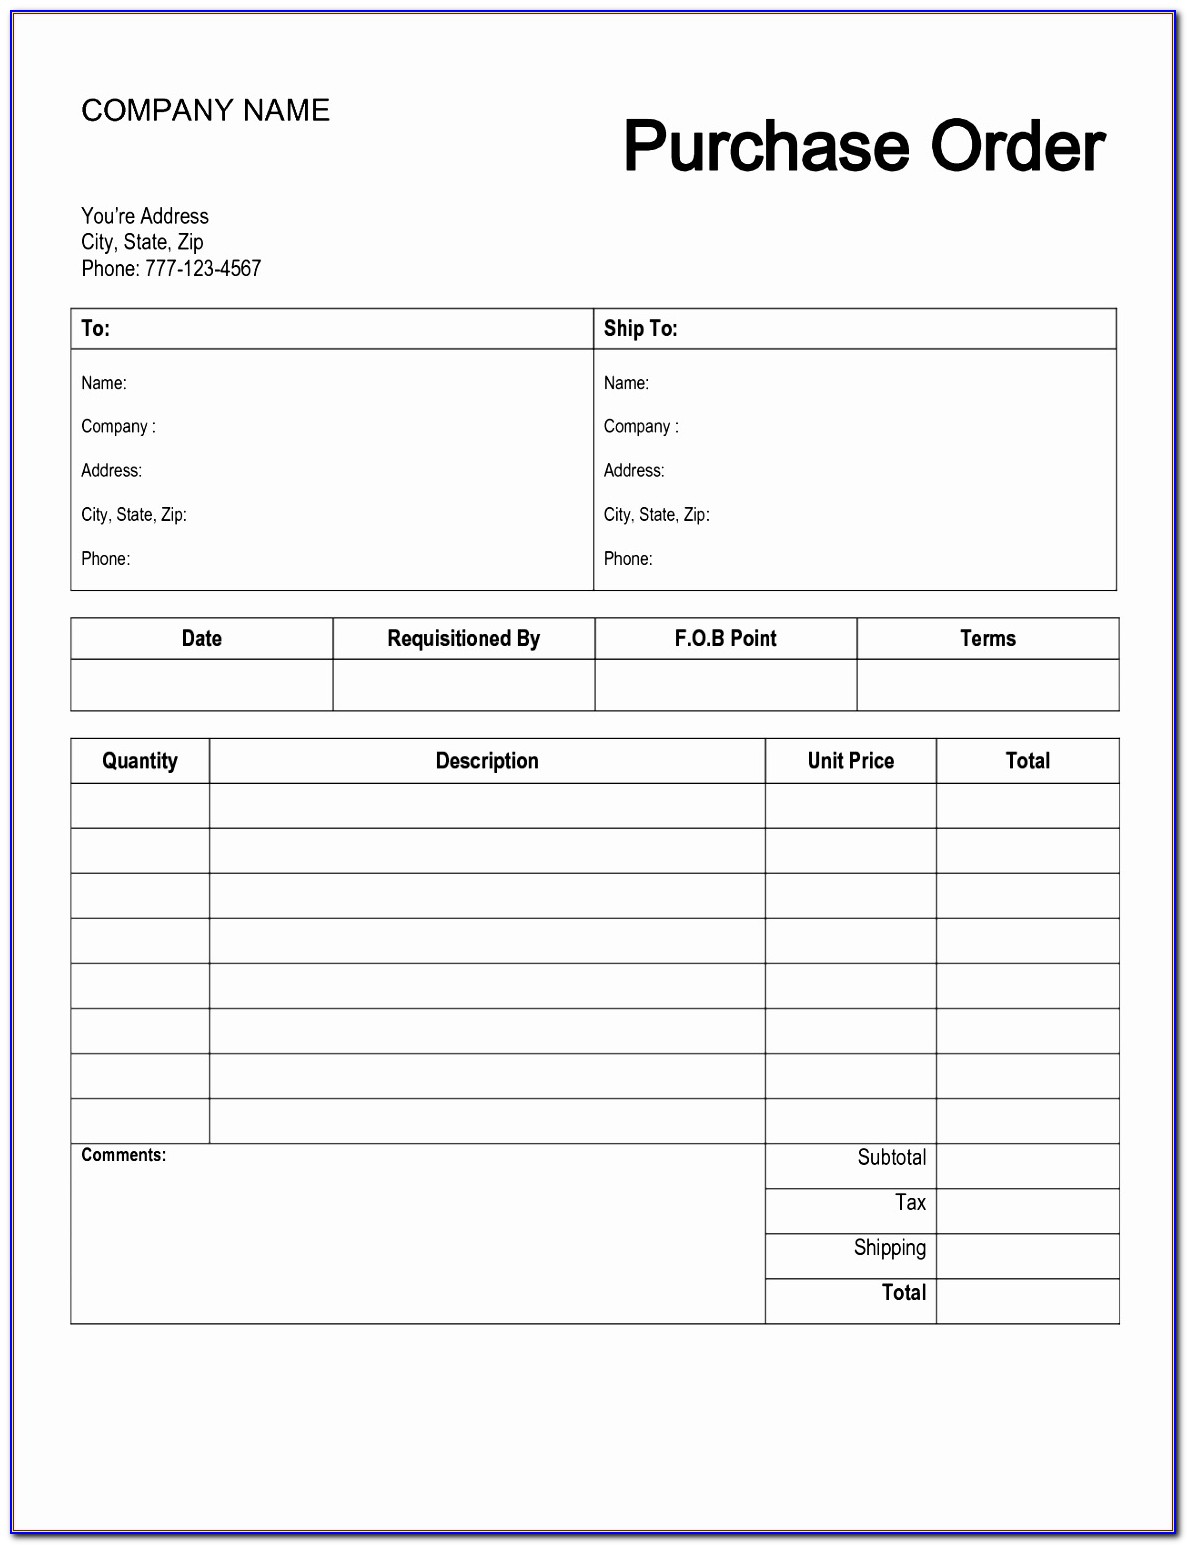 Purchase Order Template Microsoft Excel Uthwc Best Of Free Printable Purchase Order Form Purchase Order